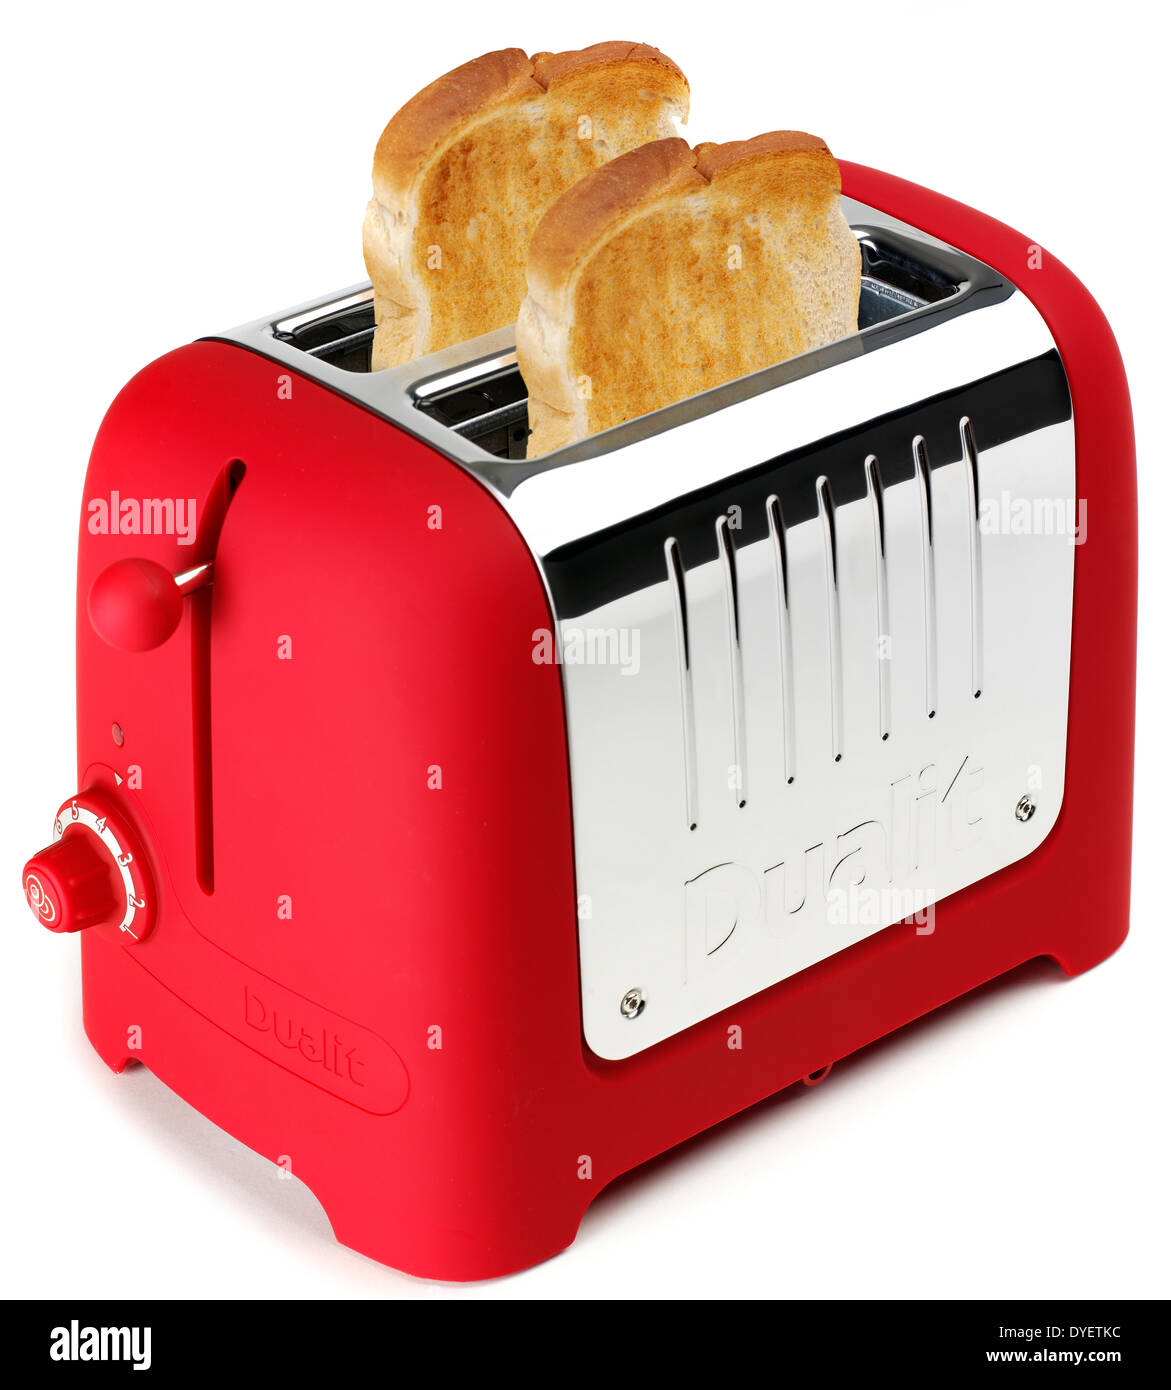 https://c8.alamy.com/comp/DYETKC/a-dualit-silver-and-red-toaster-with-two-pieces-of-white-toast-popped-DYETKC.jpg